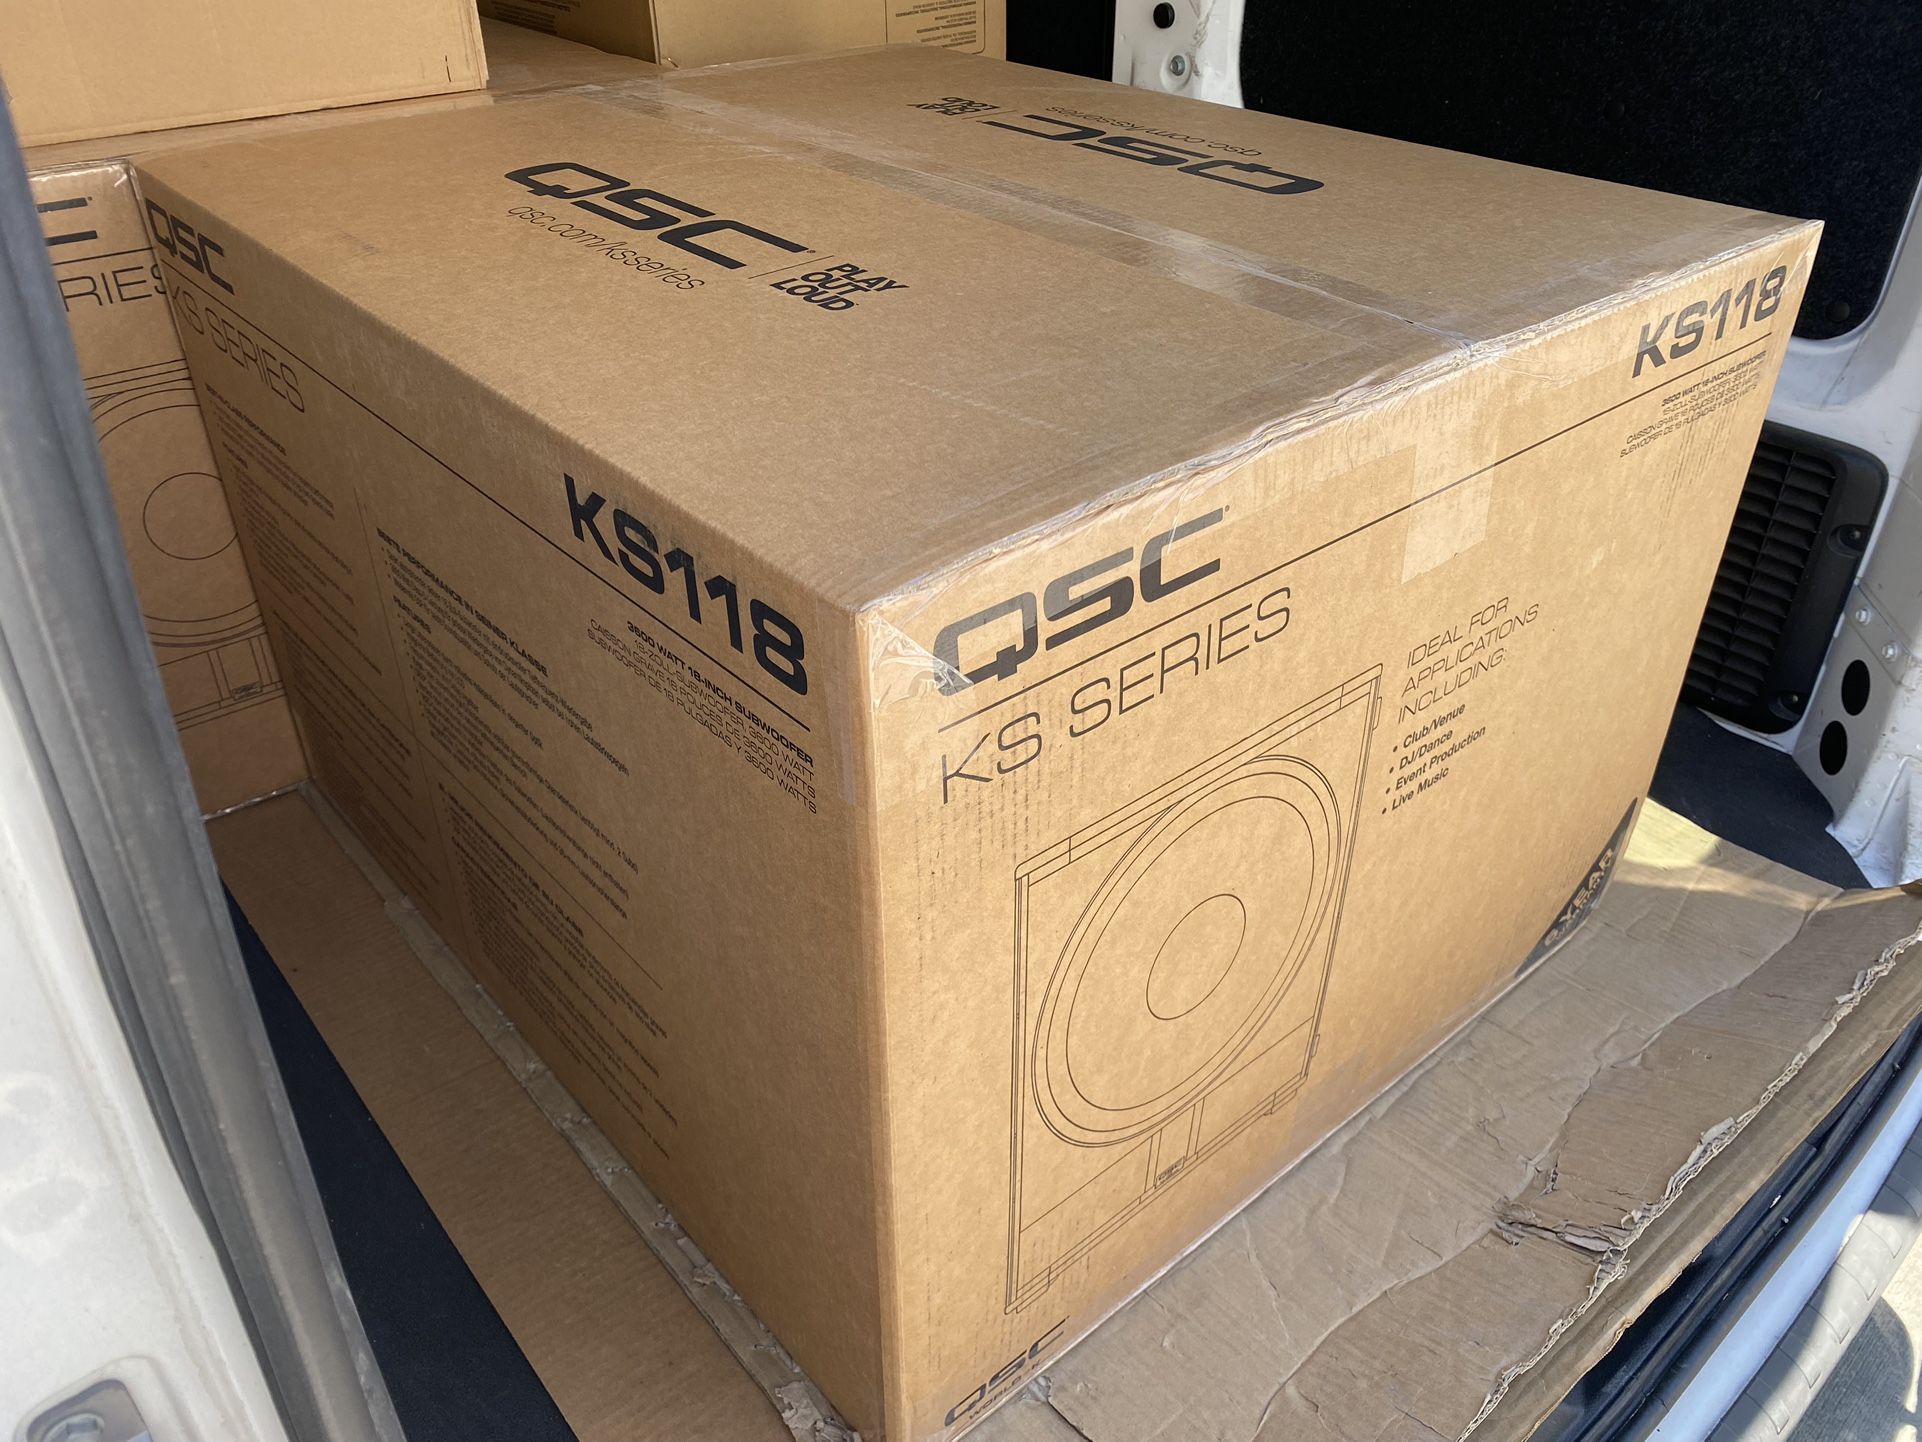 NEW - QSC KS118 3600W 18 inch Powered Subwoofer